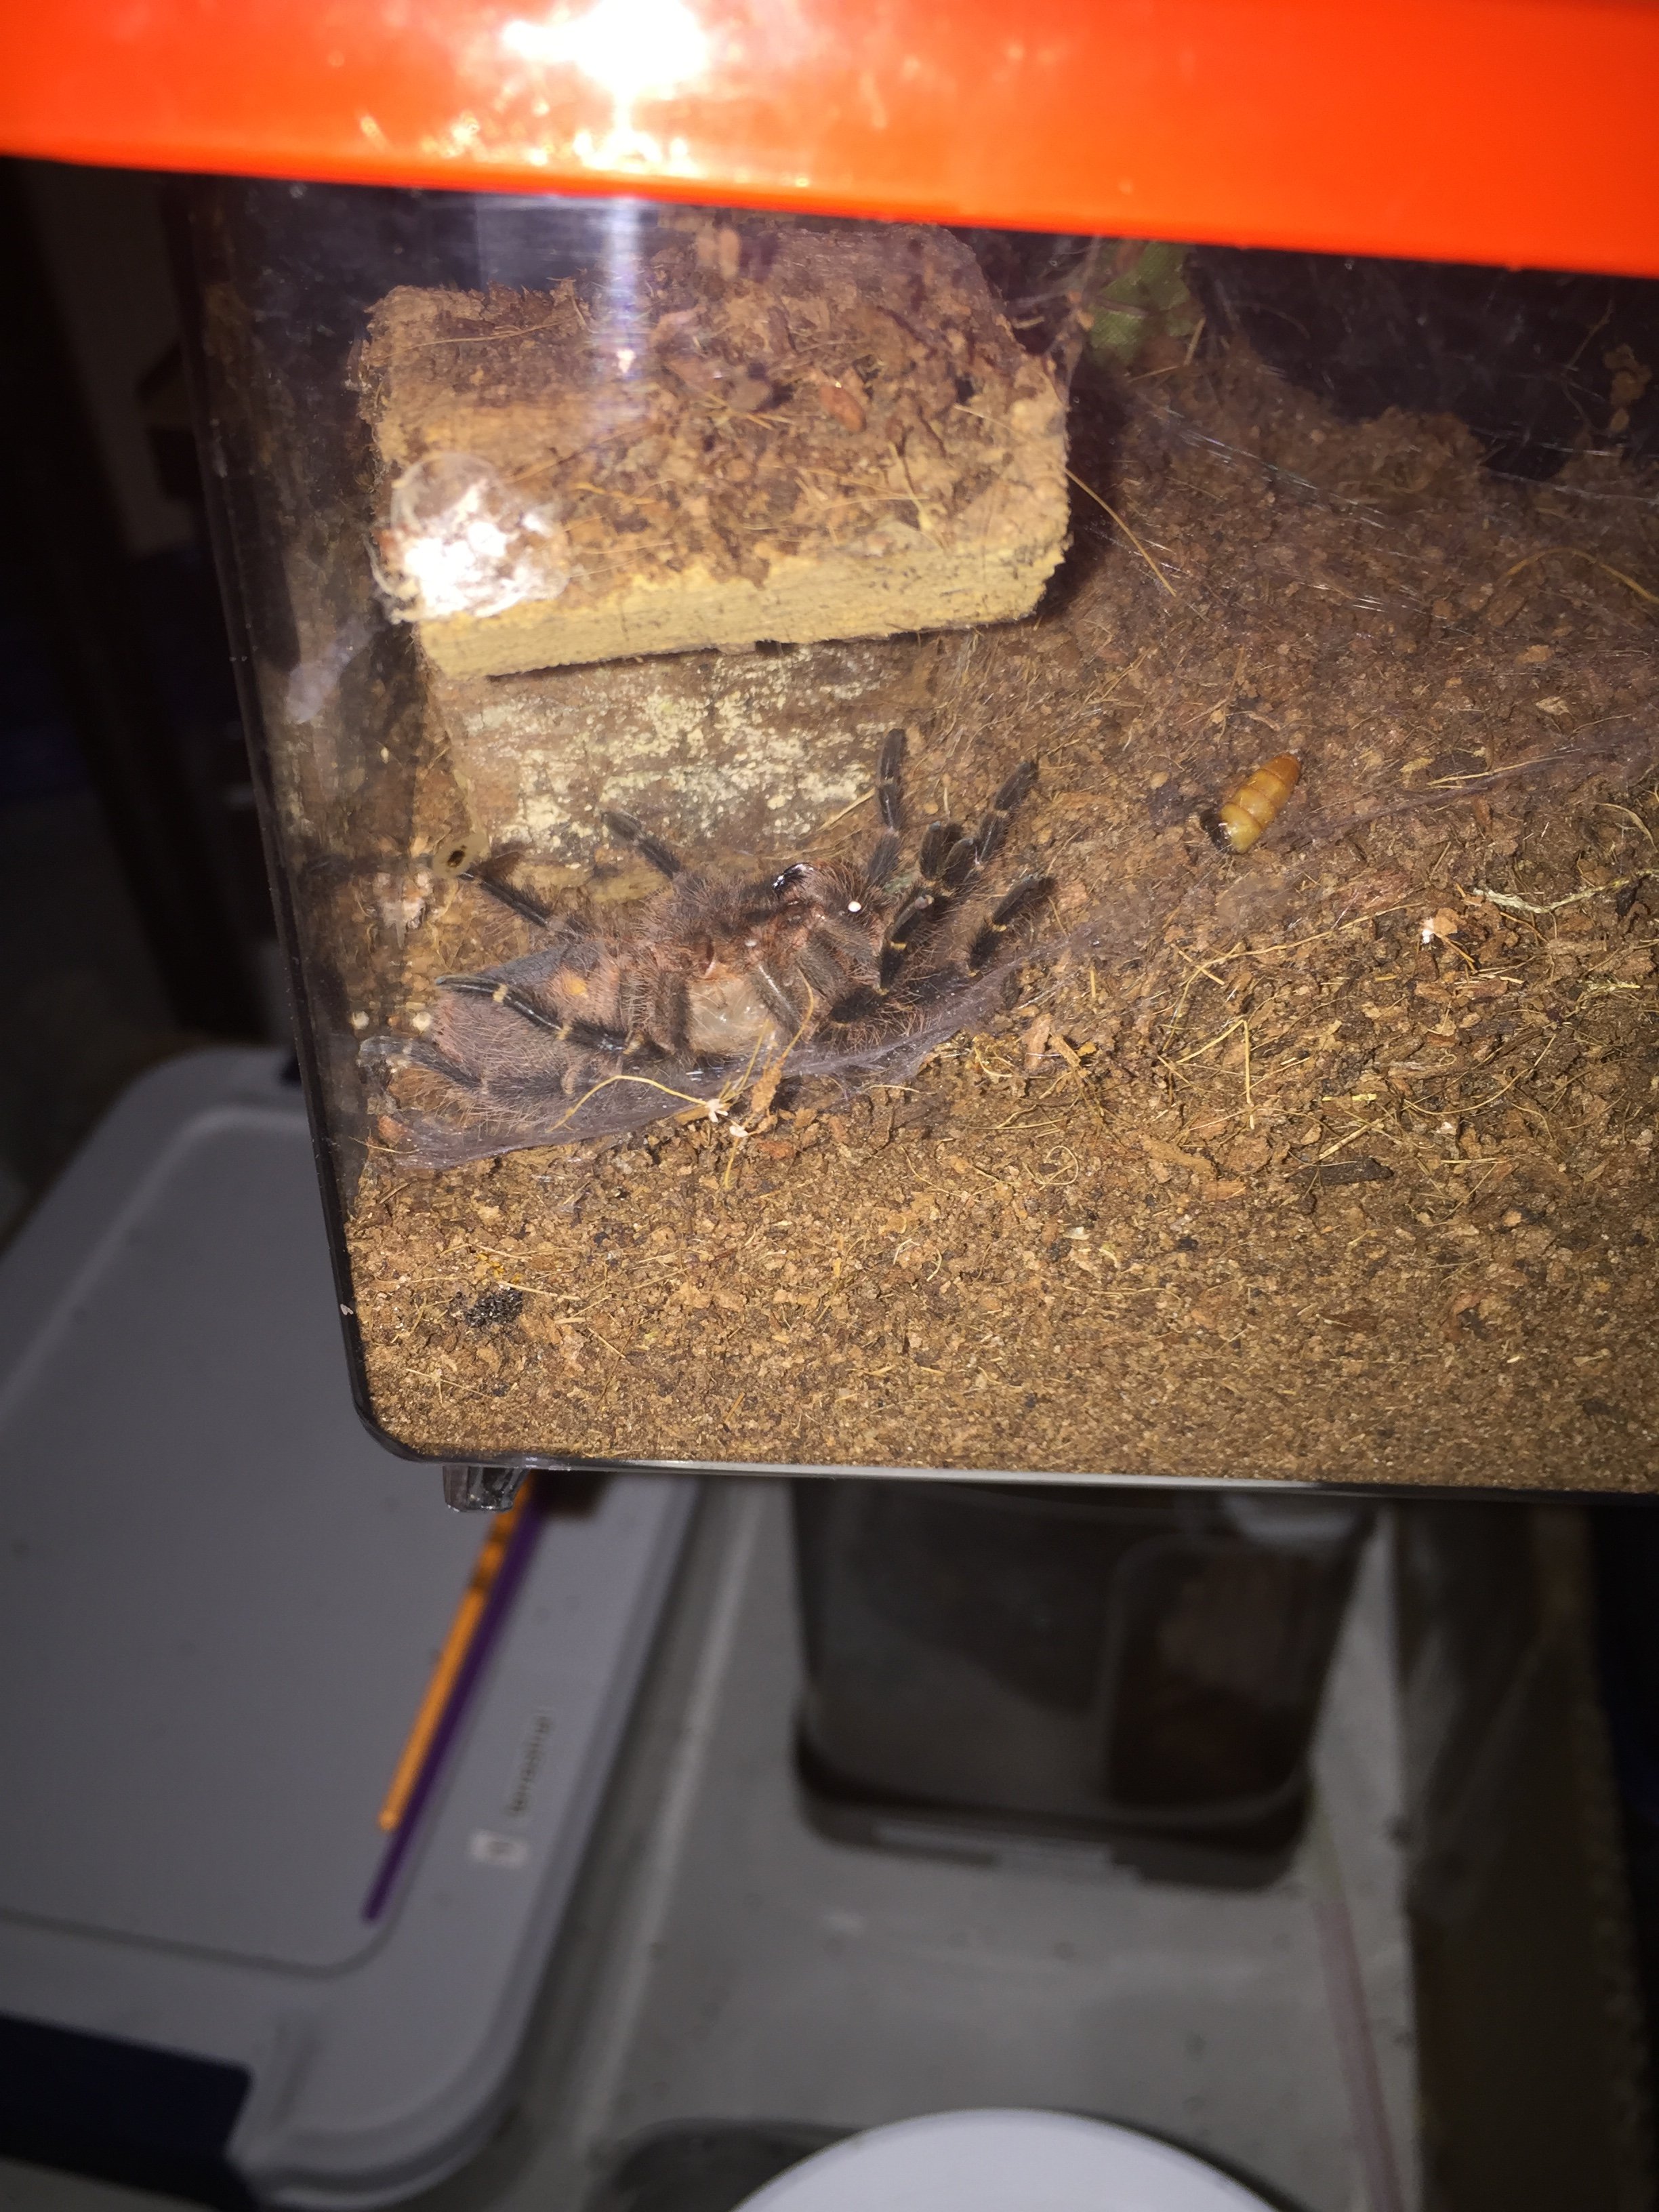 G pulchripes ready to molt